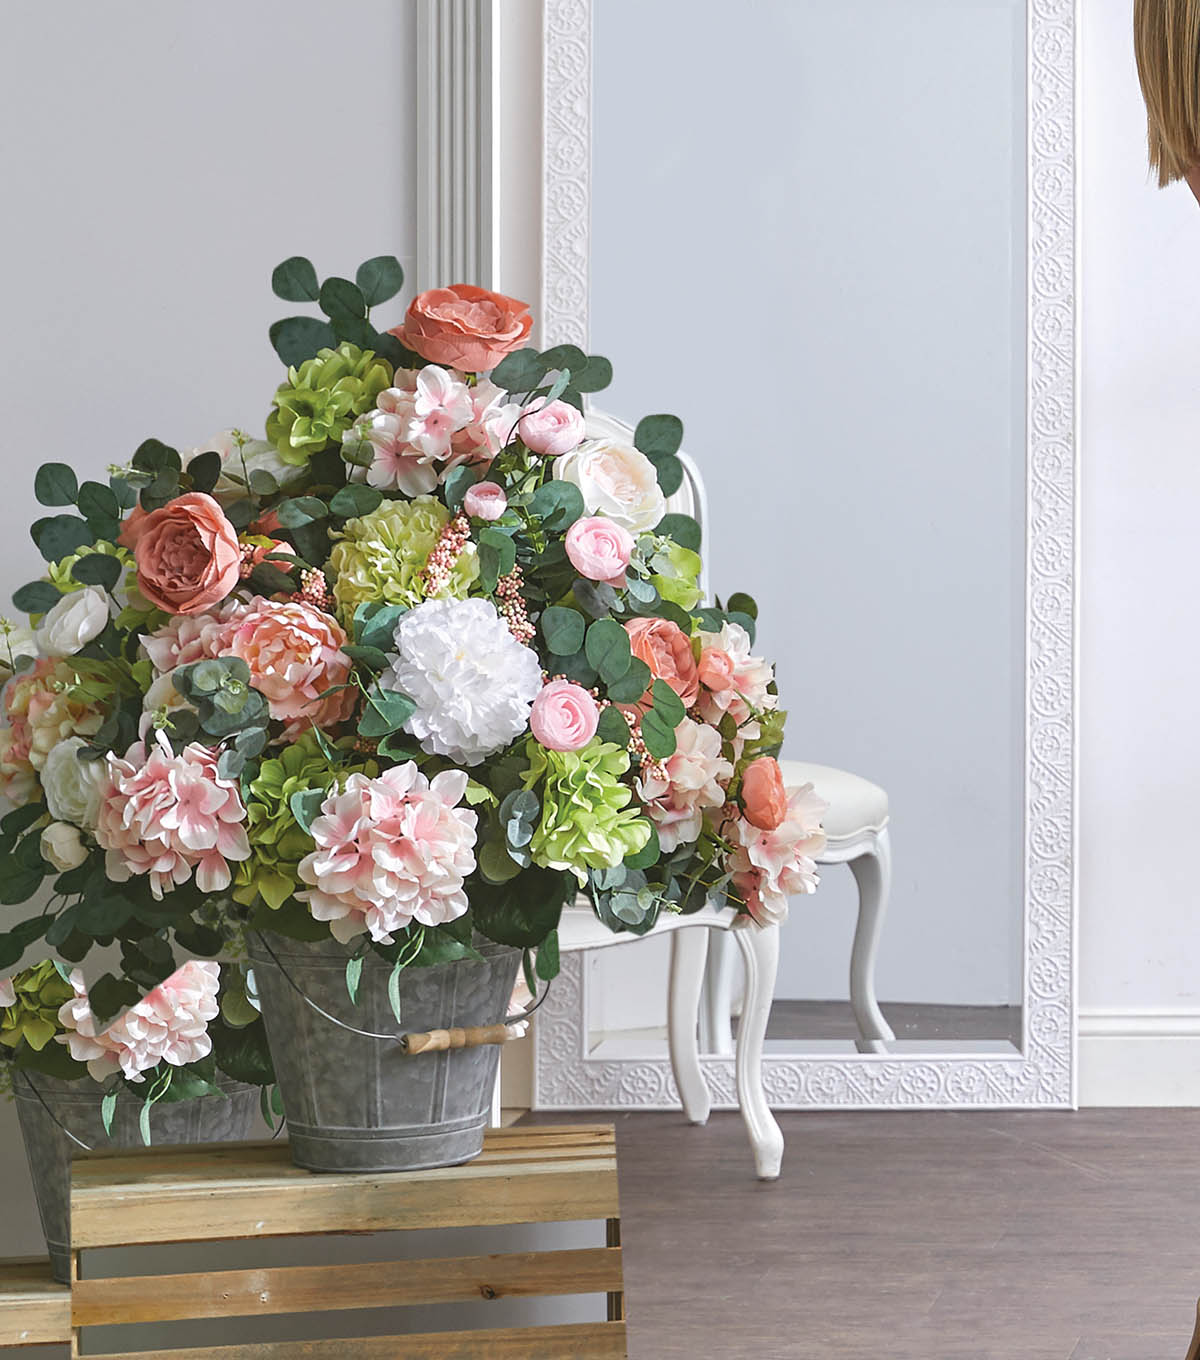 How To Make Entryway Floral Arrangements | JOANN